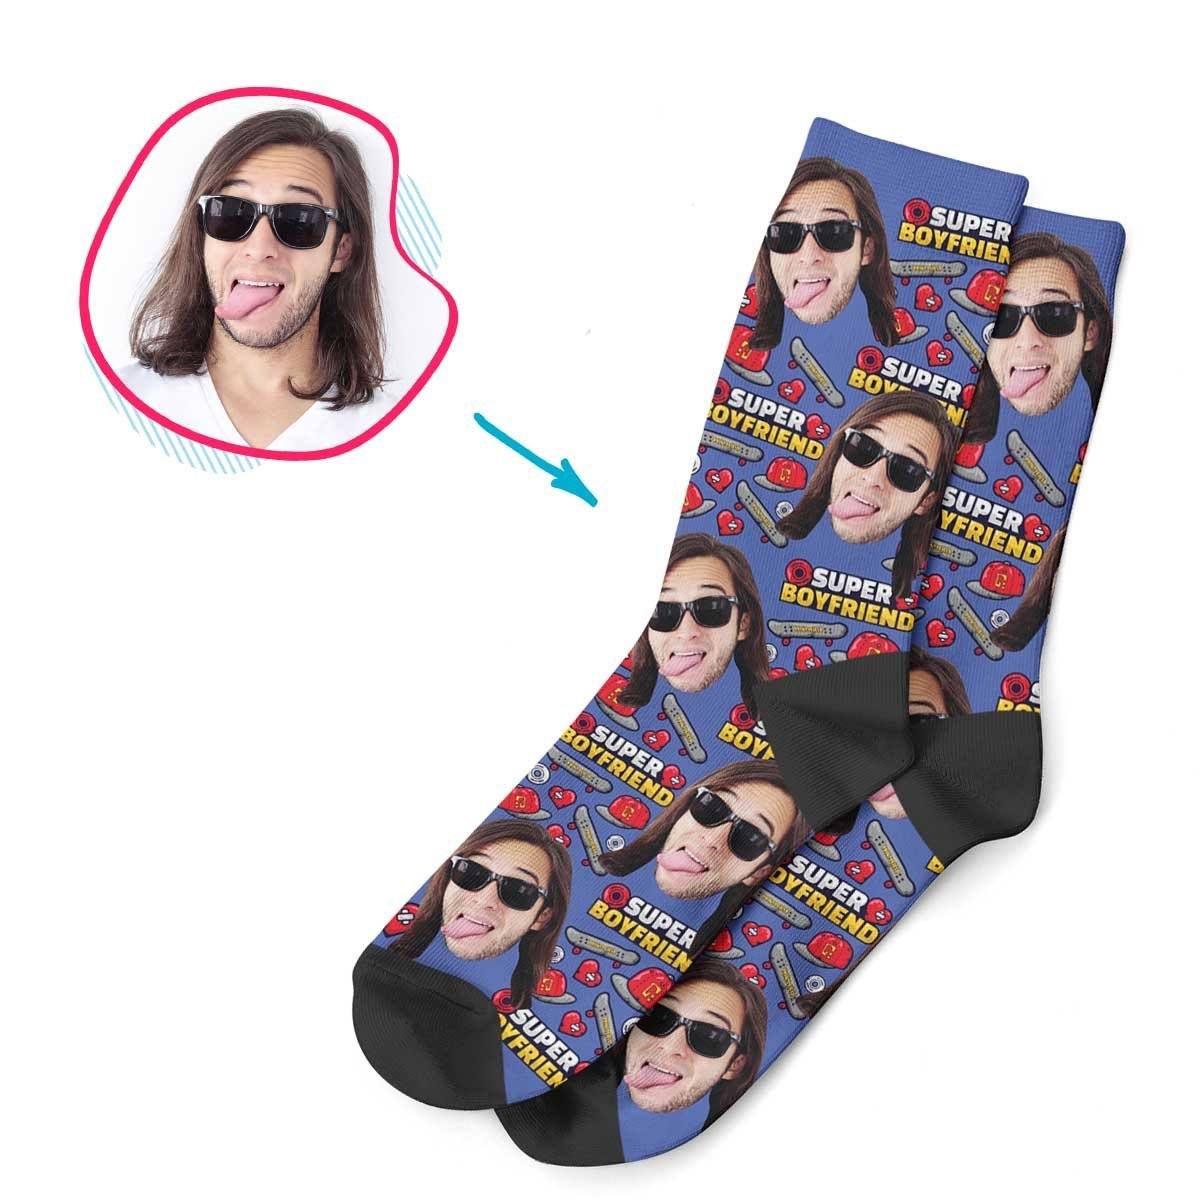 Darkblue Boyfriend personalized socks with photo of face printed on them